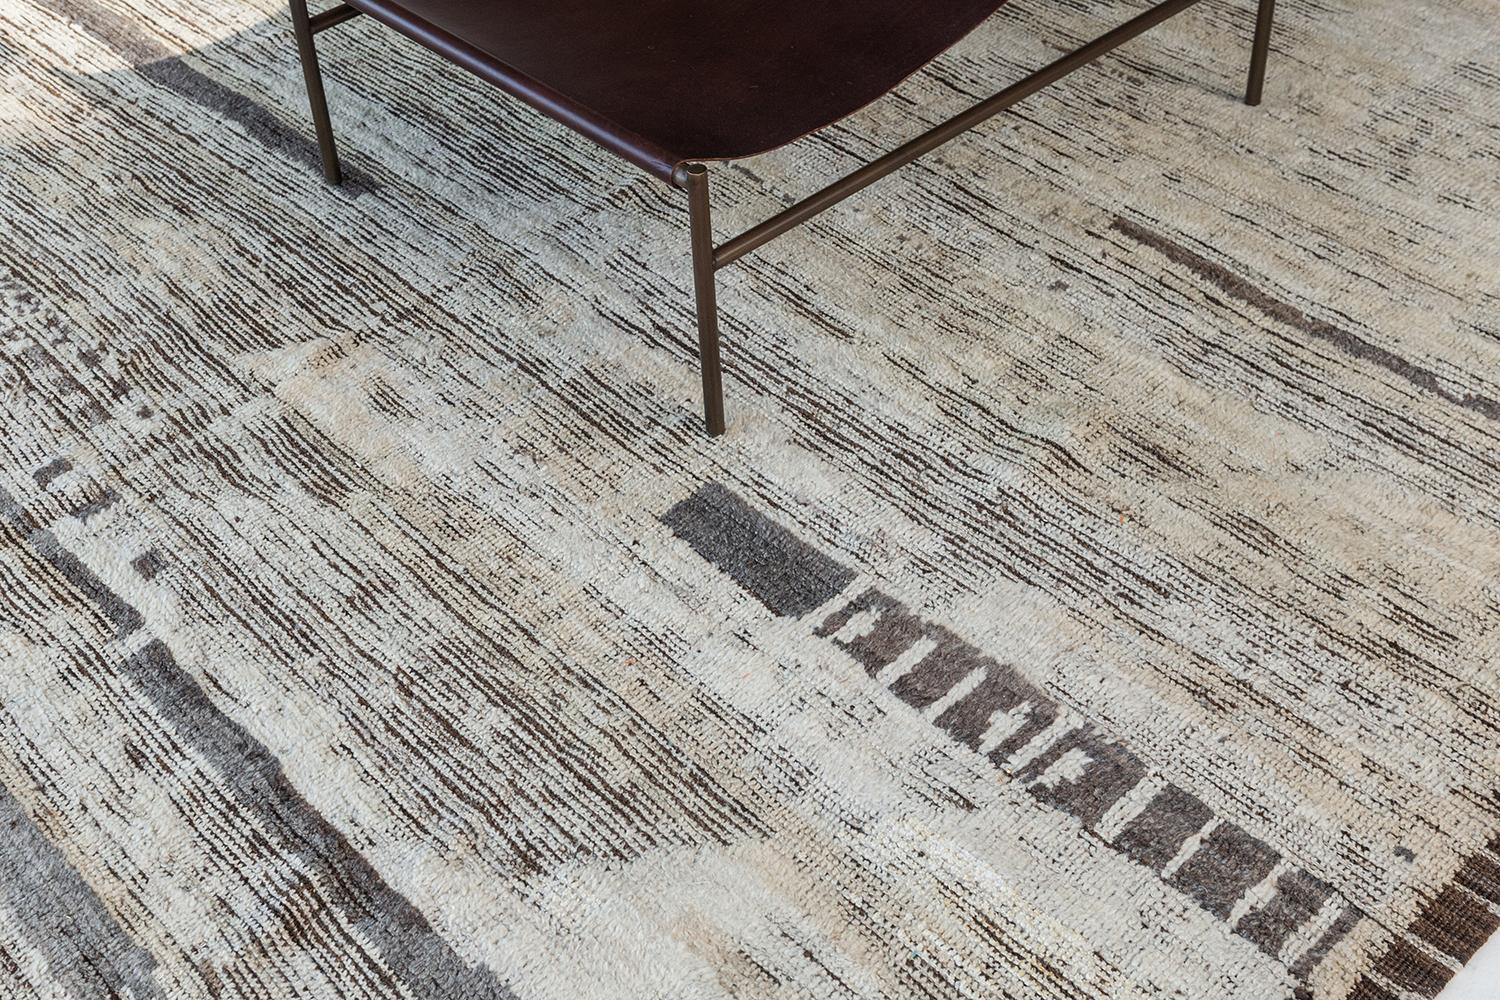 Malaren' is a luxurious wool rug with timeless embossed detailing. In addition to its perfect natural flat weave, Malaren has earthy tone shags that brings a lustrous texture and contemporary feel to one's space. With its plush pile, functional